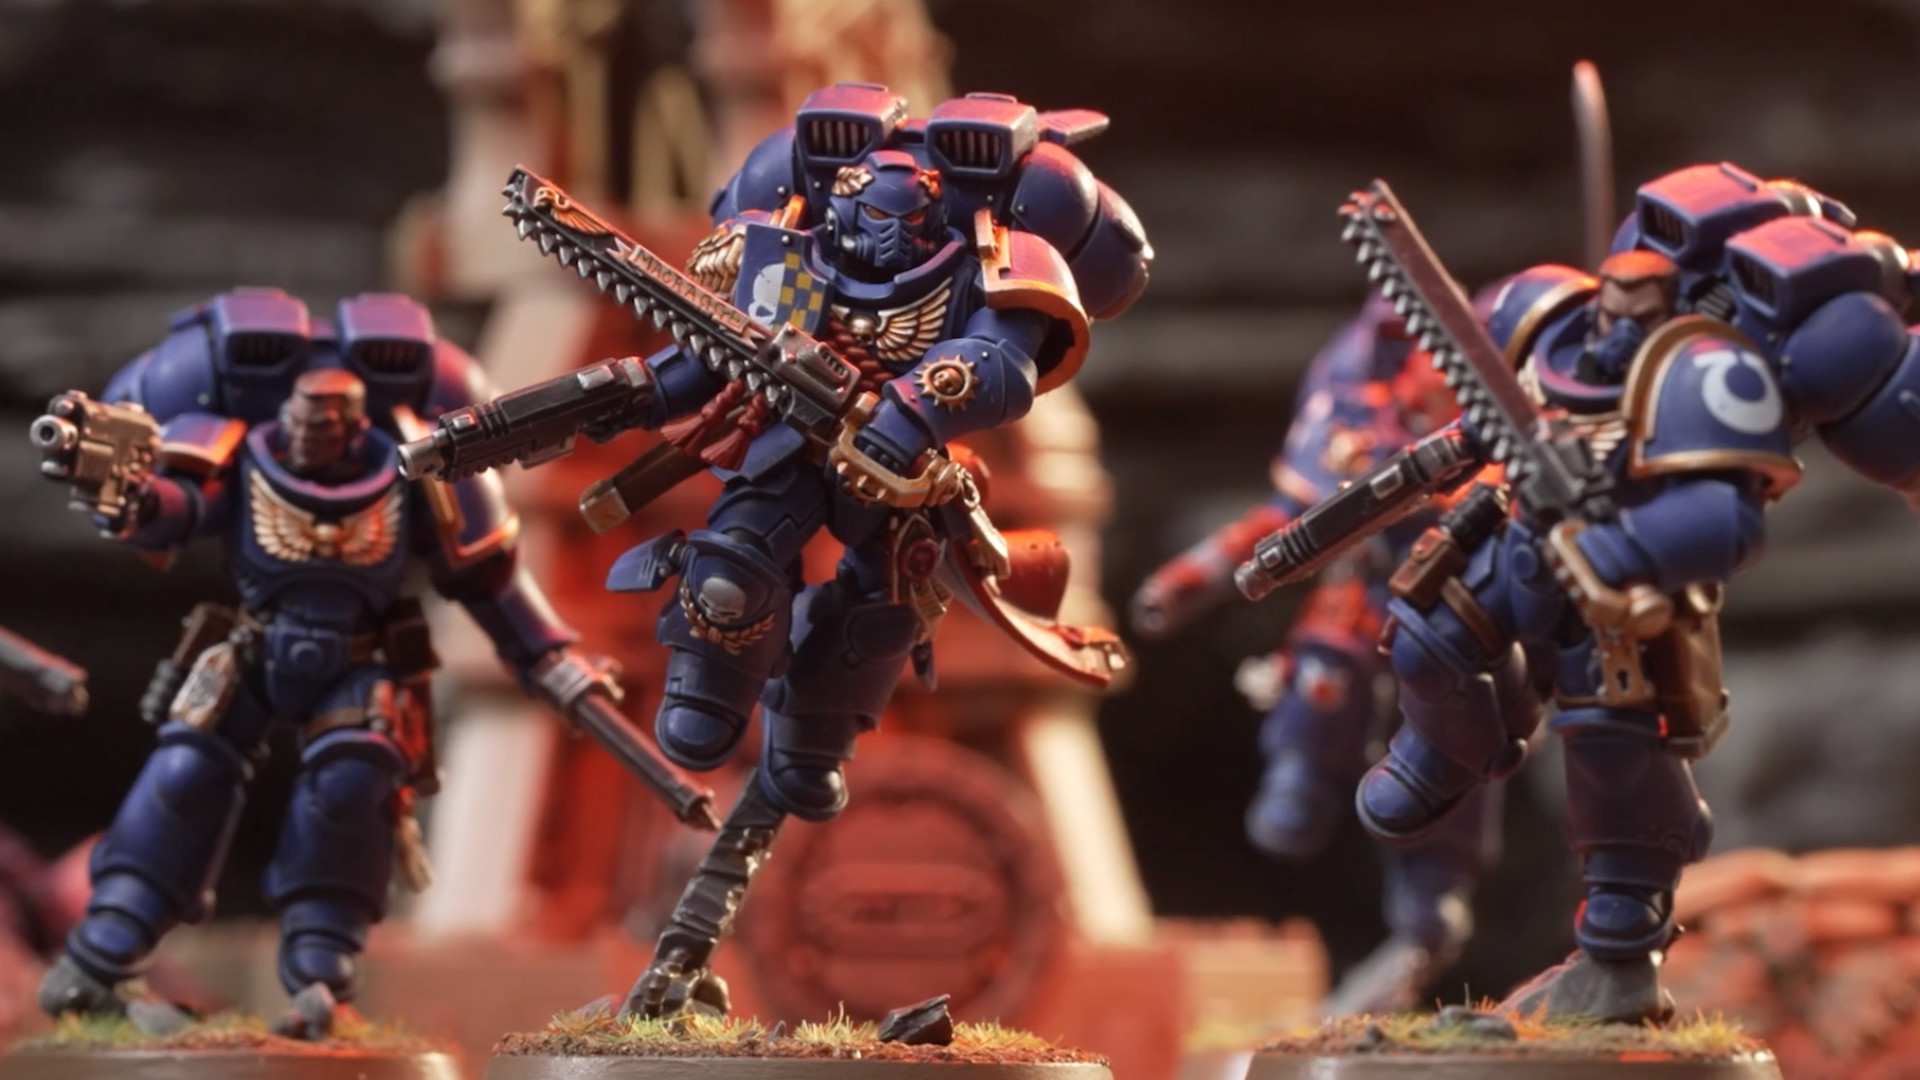 Warhammer 40,000 Space Marine Jump Pack unit makes its way across the battlefield, chainsaws drawn